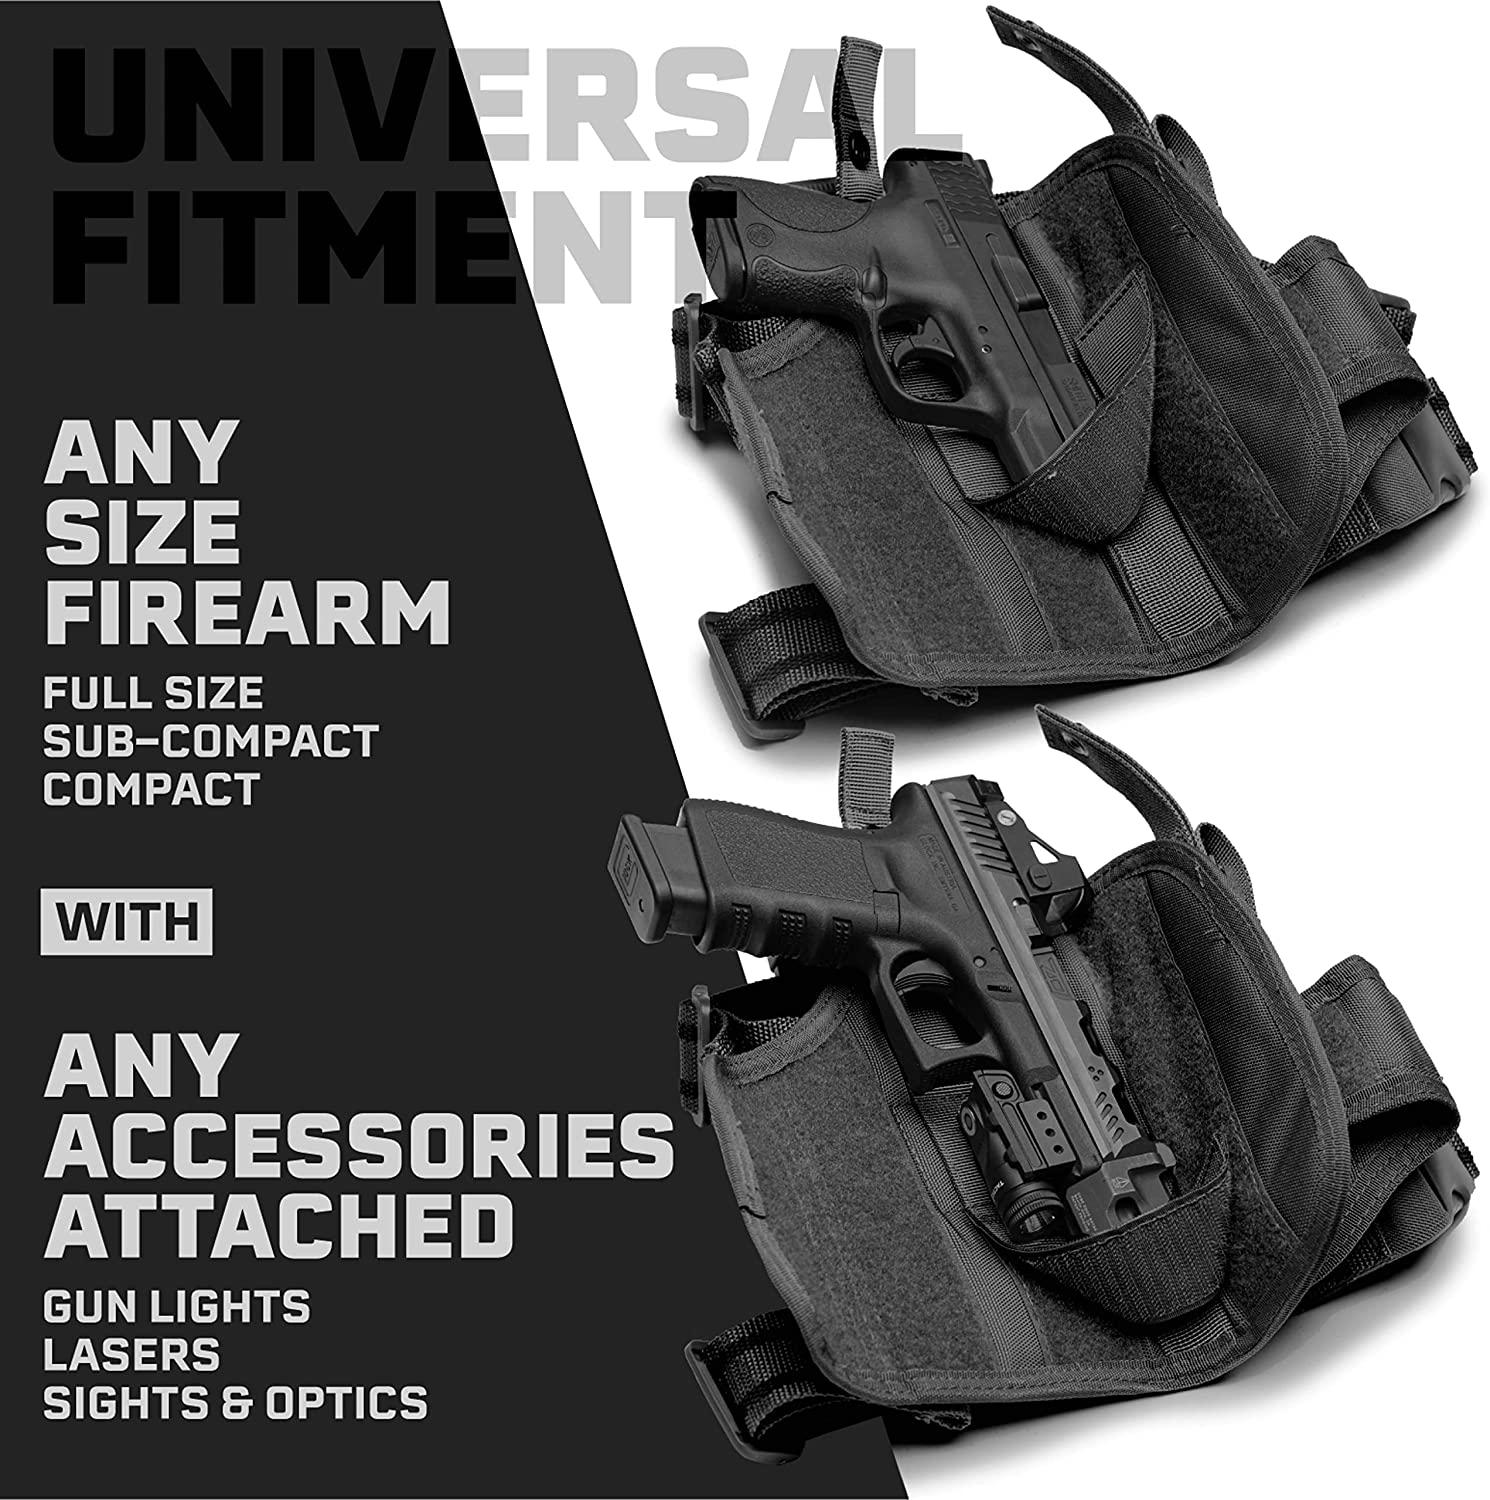  Universal Drop Leg Tactical Gun Holster fit Pistols with  Optic/Light/Laser, Adjustable Thigh Nylon Gun Holster Compatible with Glock  1911 S&W Sig Sauer Ruger Taurus Berreta CZ HK and More 